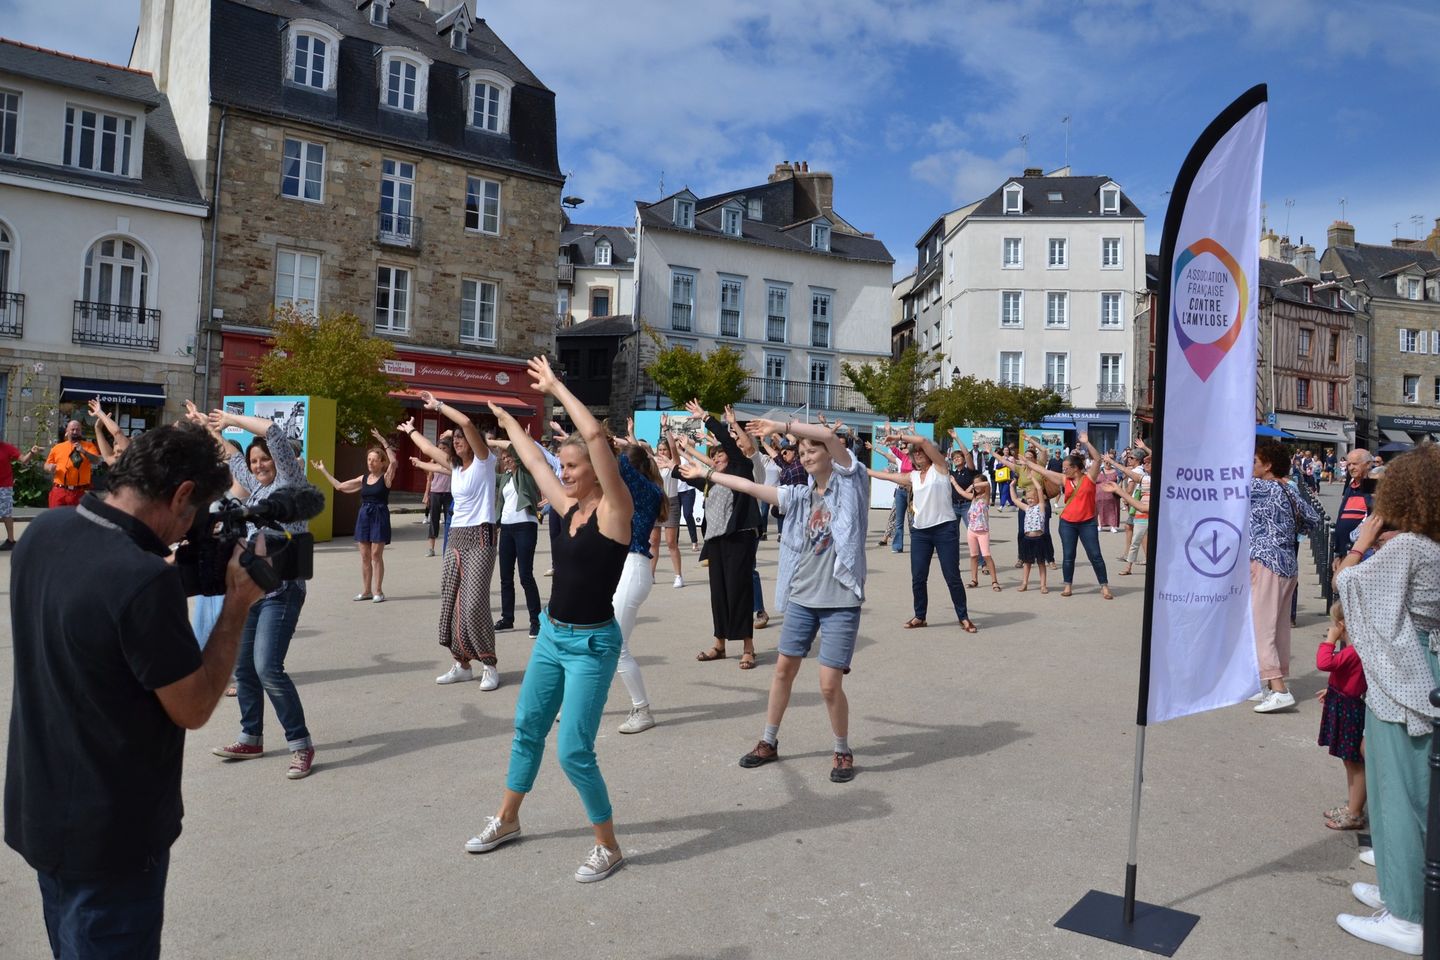 A flashmob in France for the World Amyloidosis Day